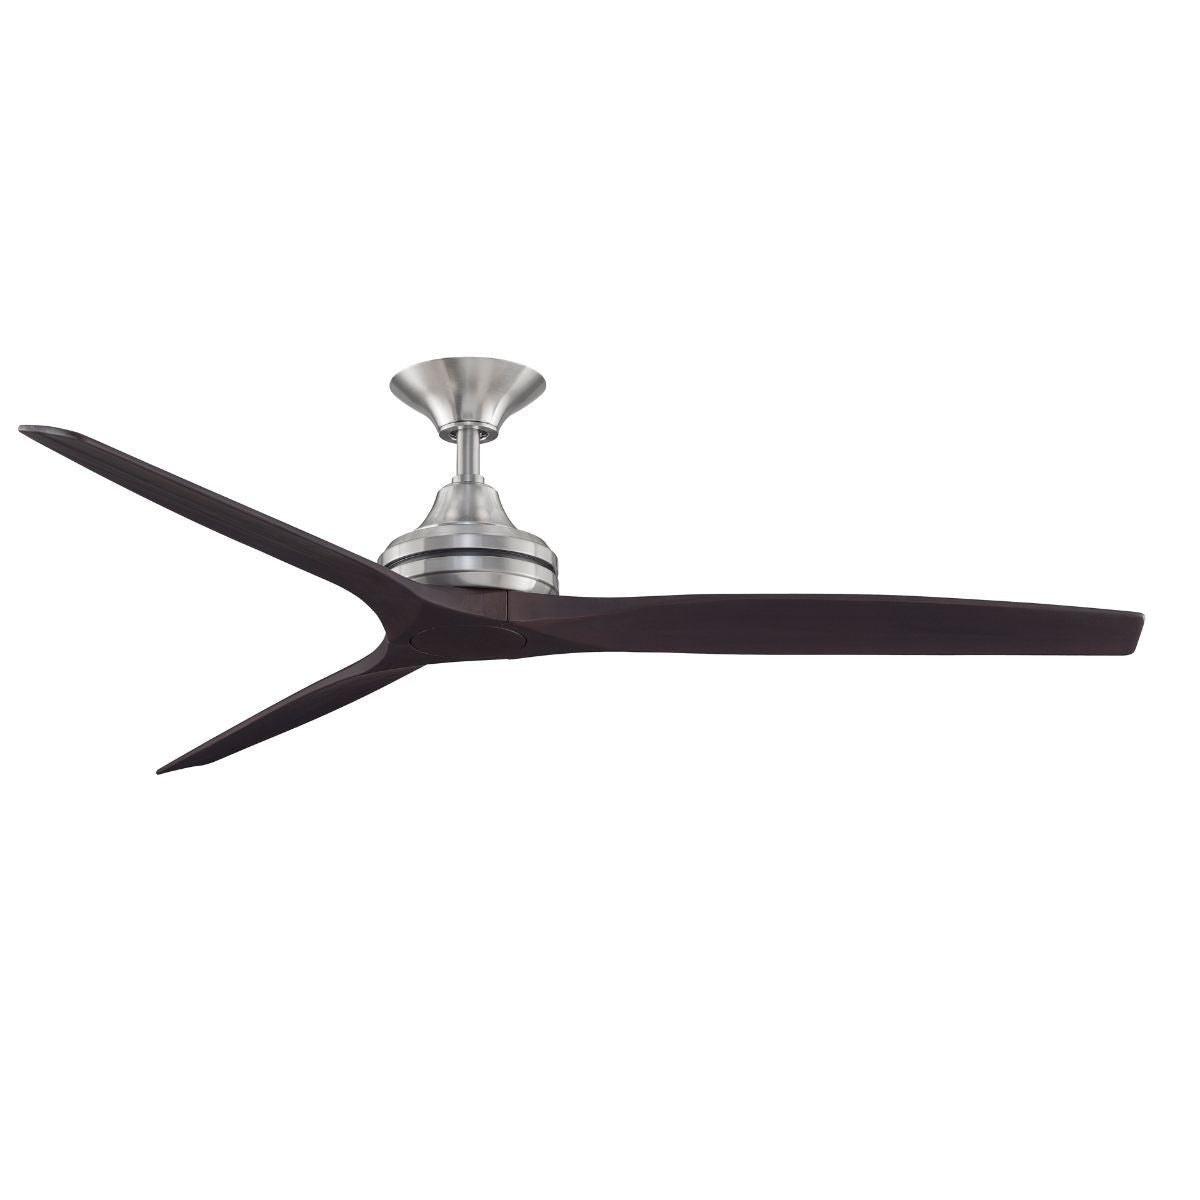 Spitfire Outdoor Ceiling Fan Motor With Remote, Set of 3 Blades Sold Separately